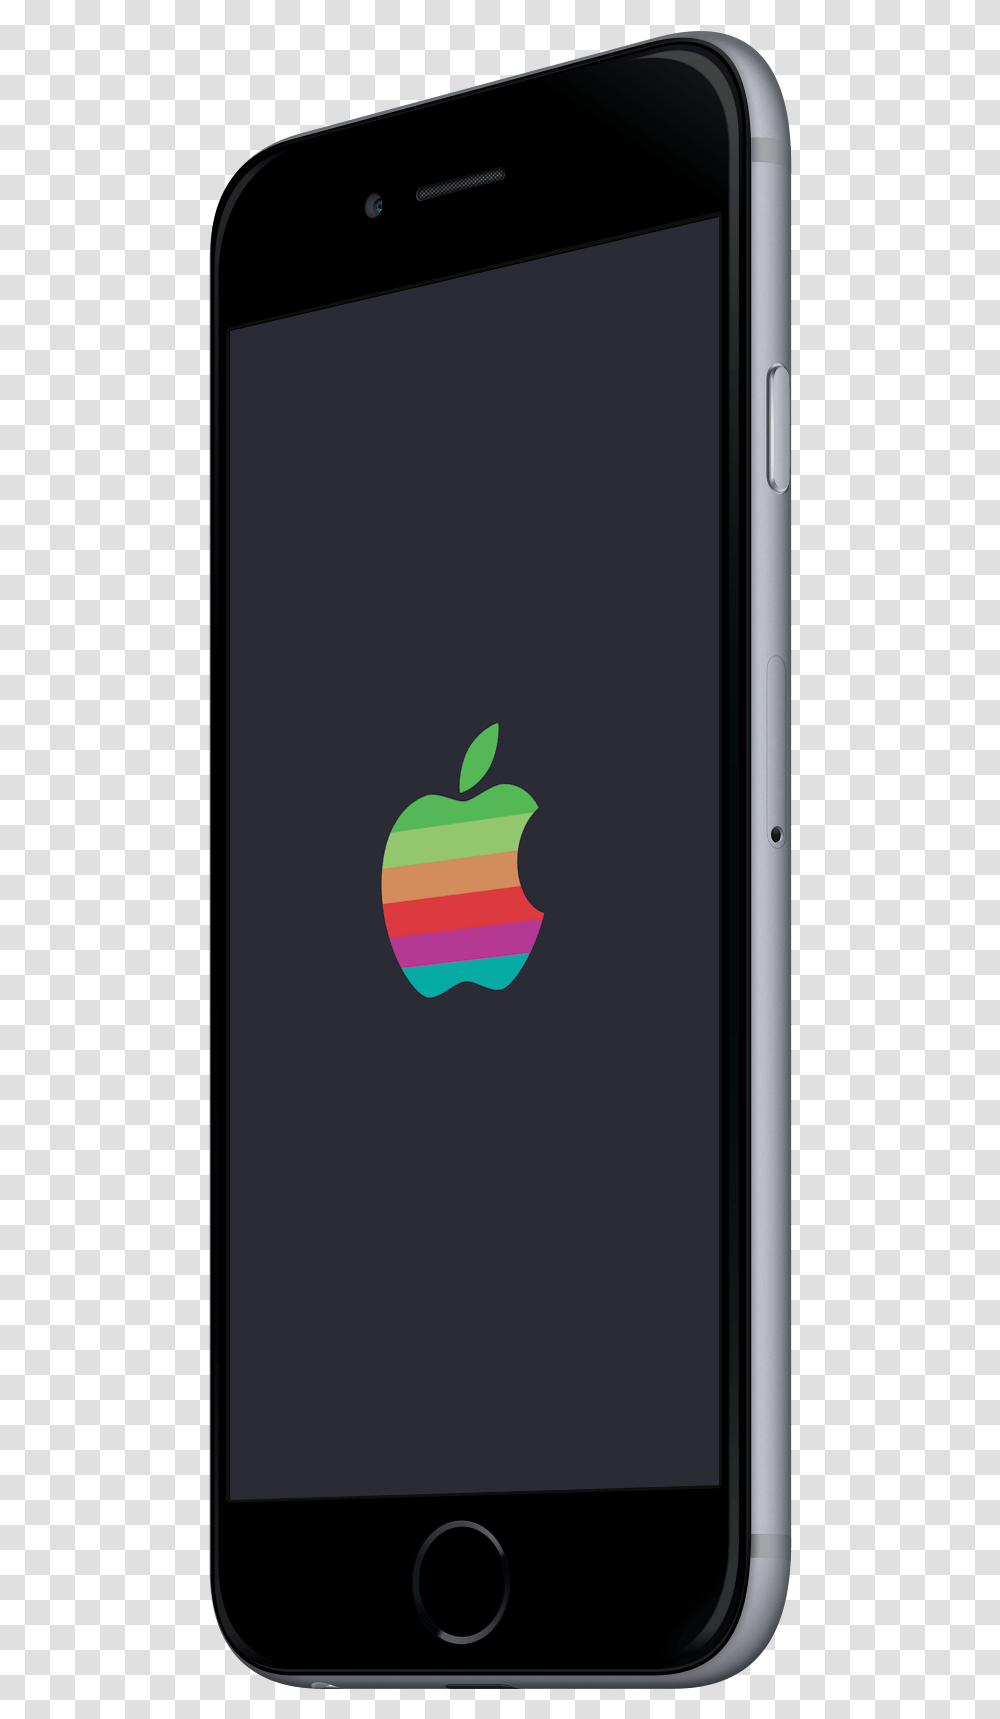 Apple Wwdc 2016 Wallpaper Matt Bonney Preview Iphone Hnh Nn Qu To Ca Apple, Mobile Phone, Electronics, Cell Phone, Computer Transparent Png